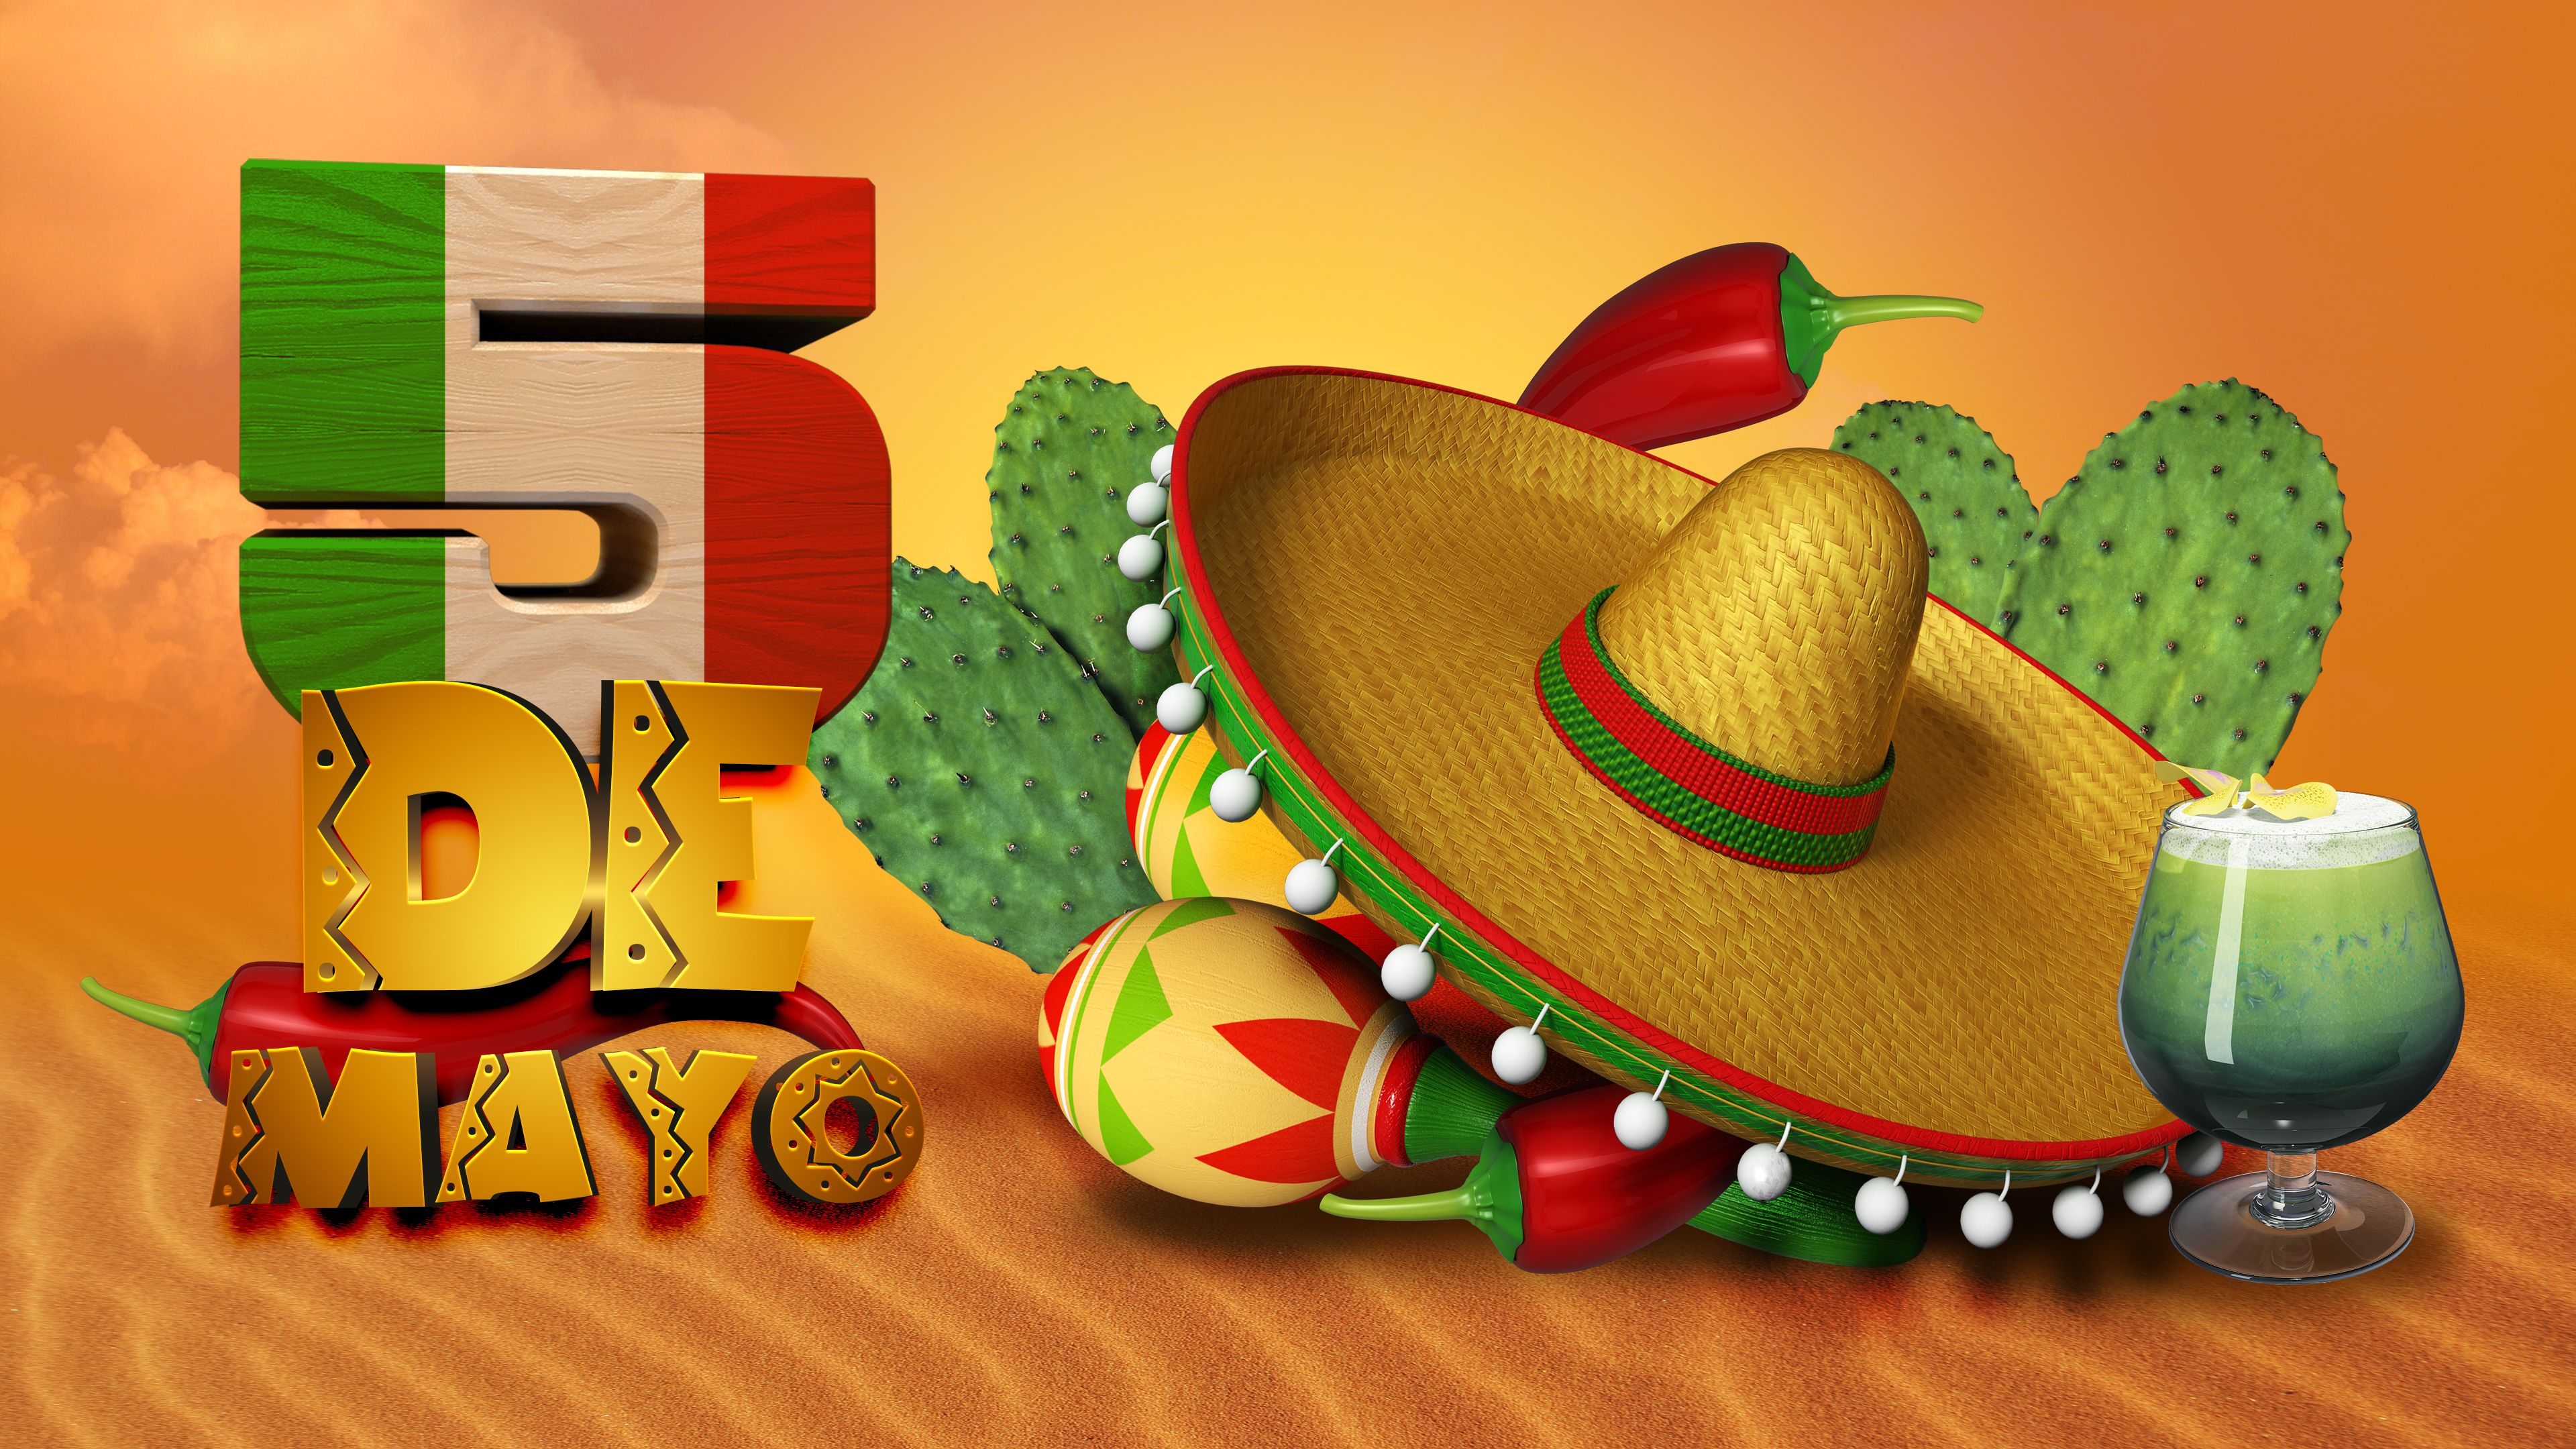 Today's Freebie Is About A Great Looking Cinco De Mayo